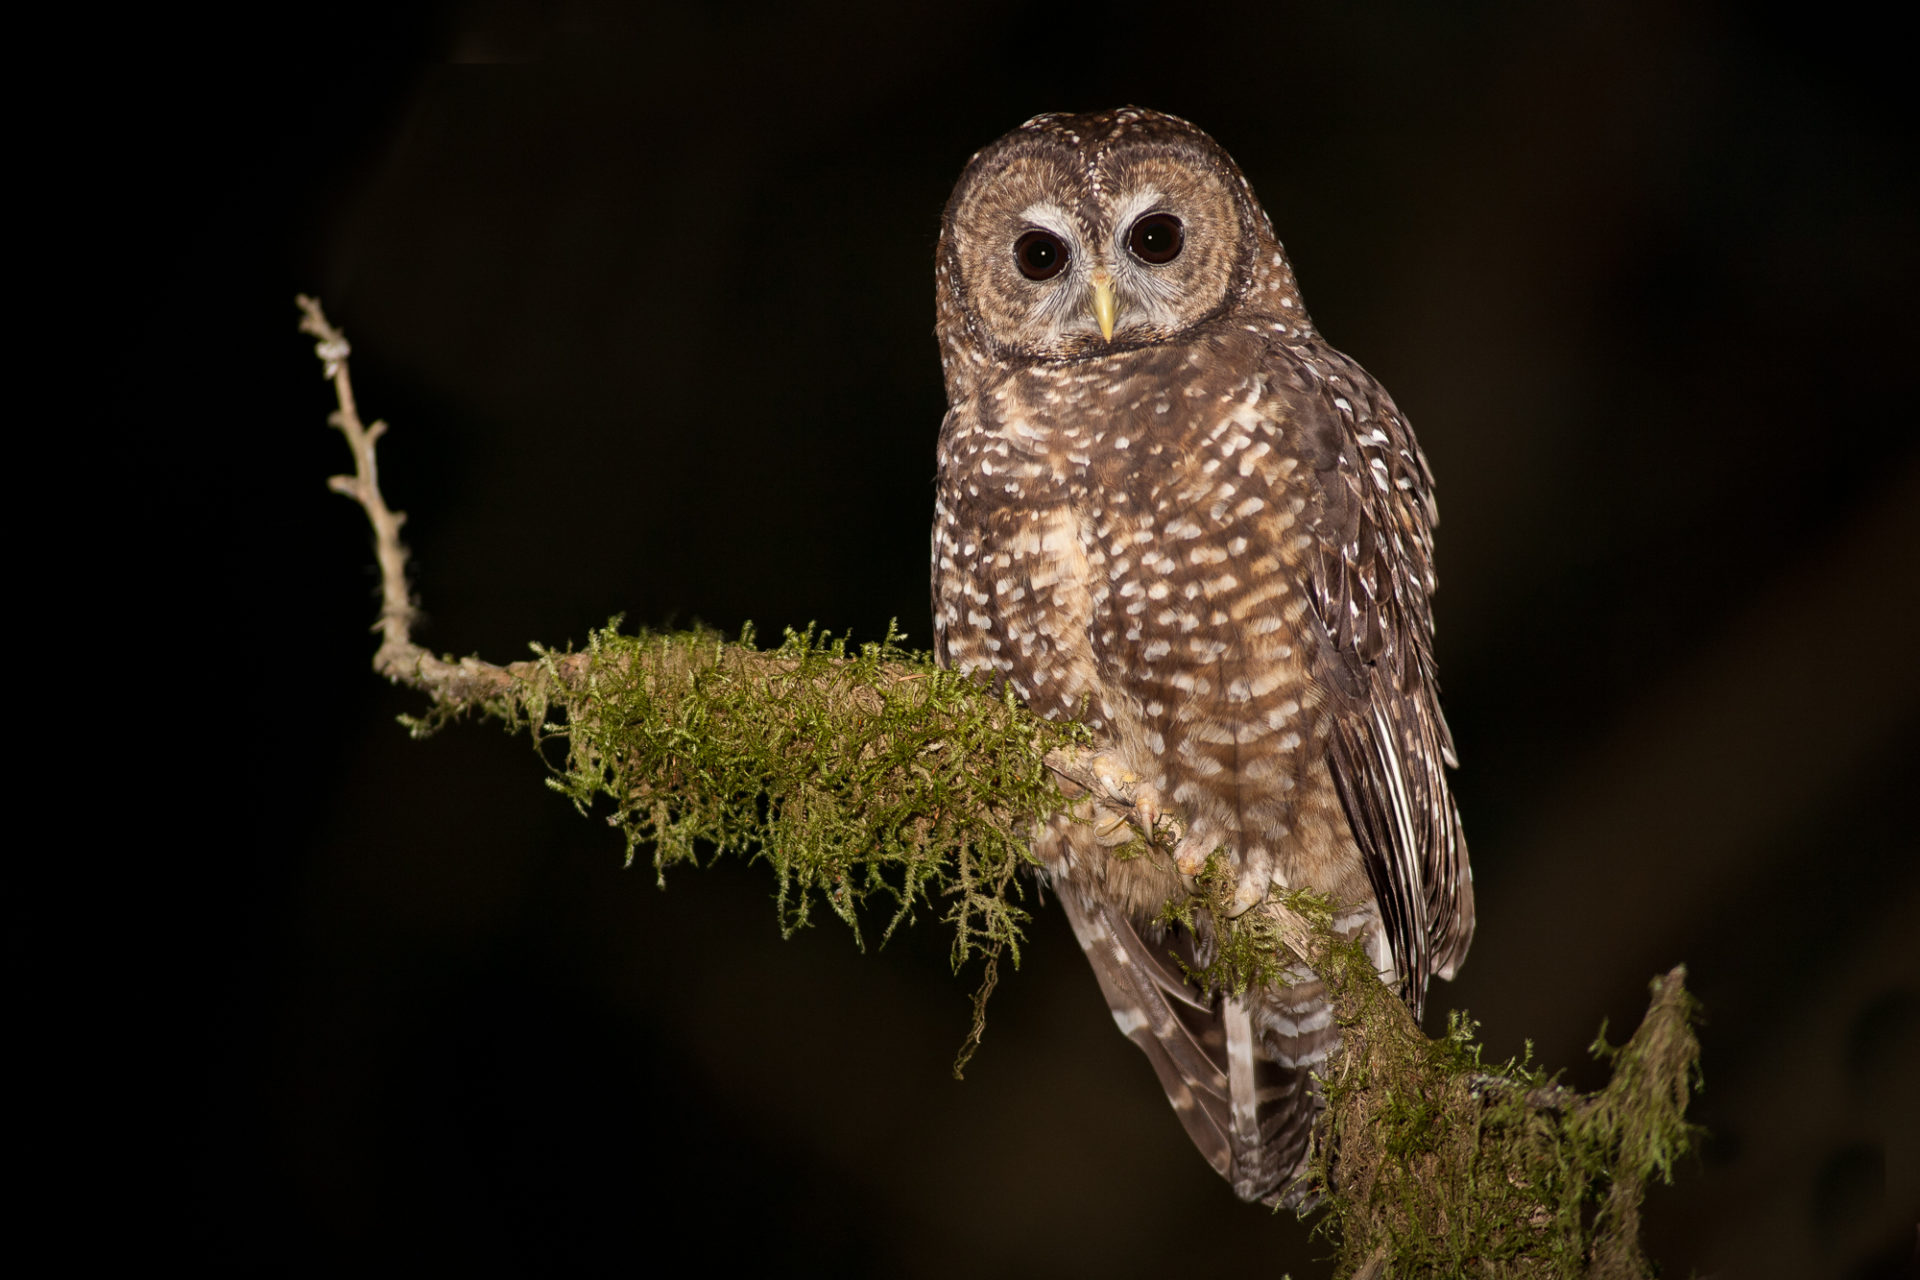 A Northern Spotted Owl, strix occidentalis caurina, in southern B.C. Photo: Jared Hobbs